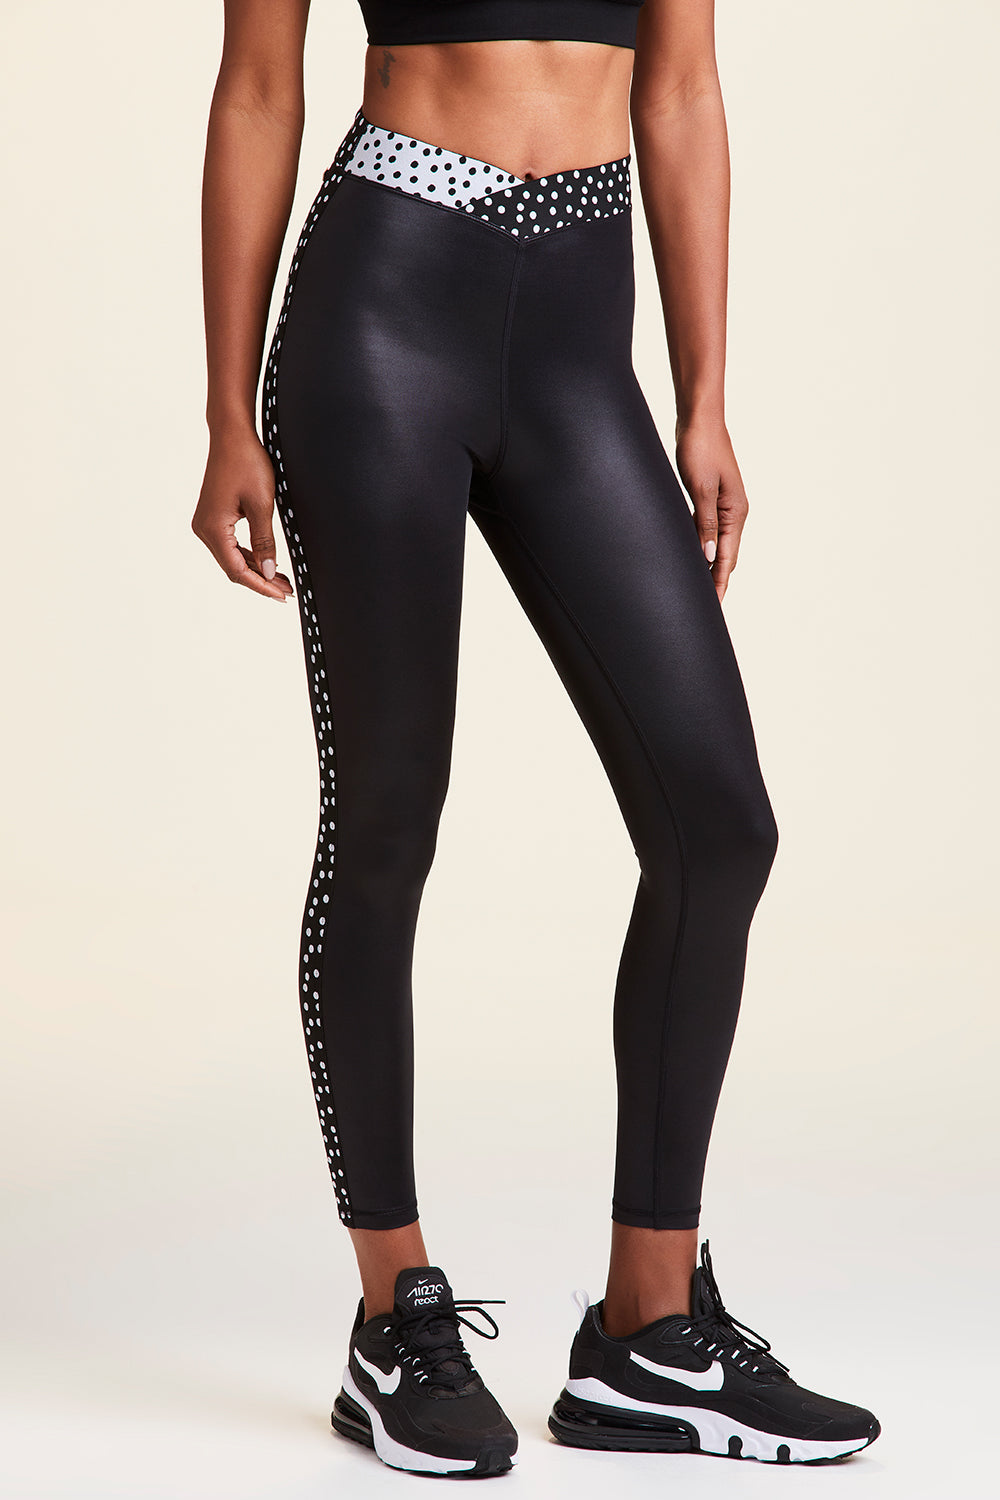 Front view of Alala Women's Luxury Athleisure shiny black tight with black and white polda dot detail on waistband and side seams